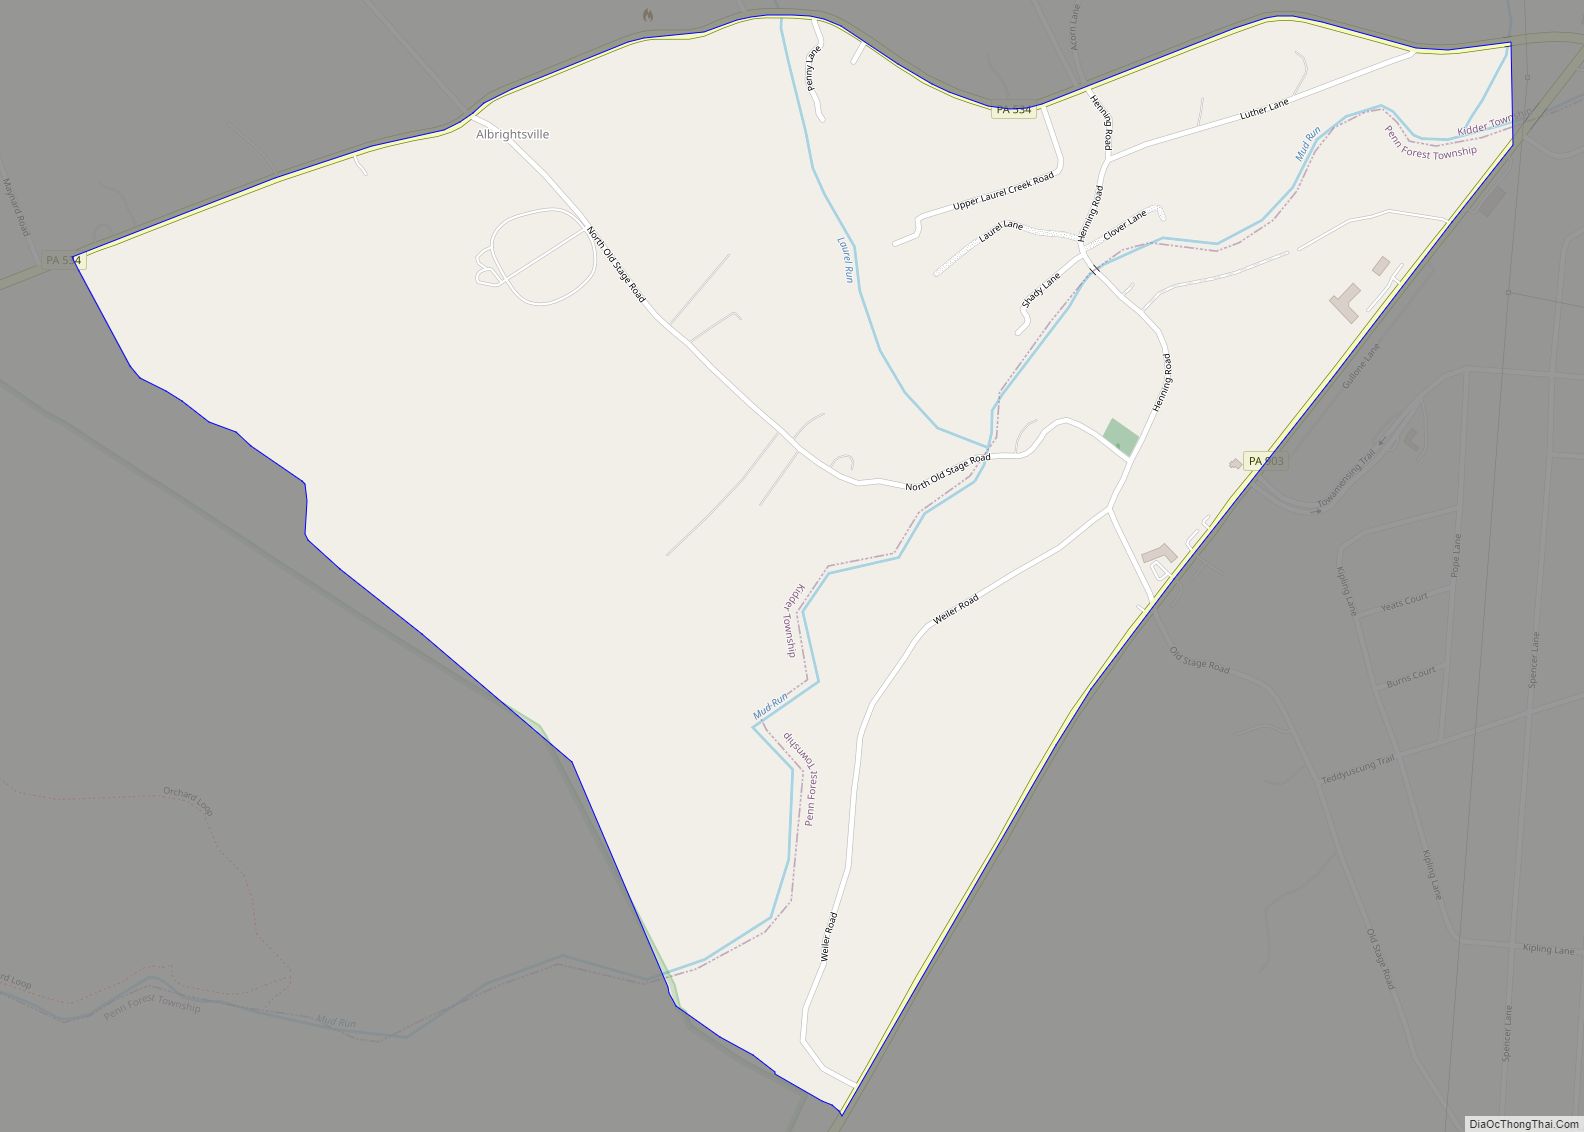 Map of Albrightsville CDP